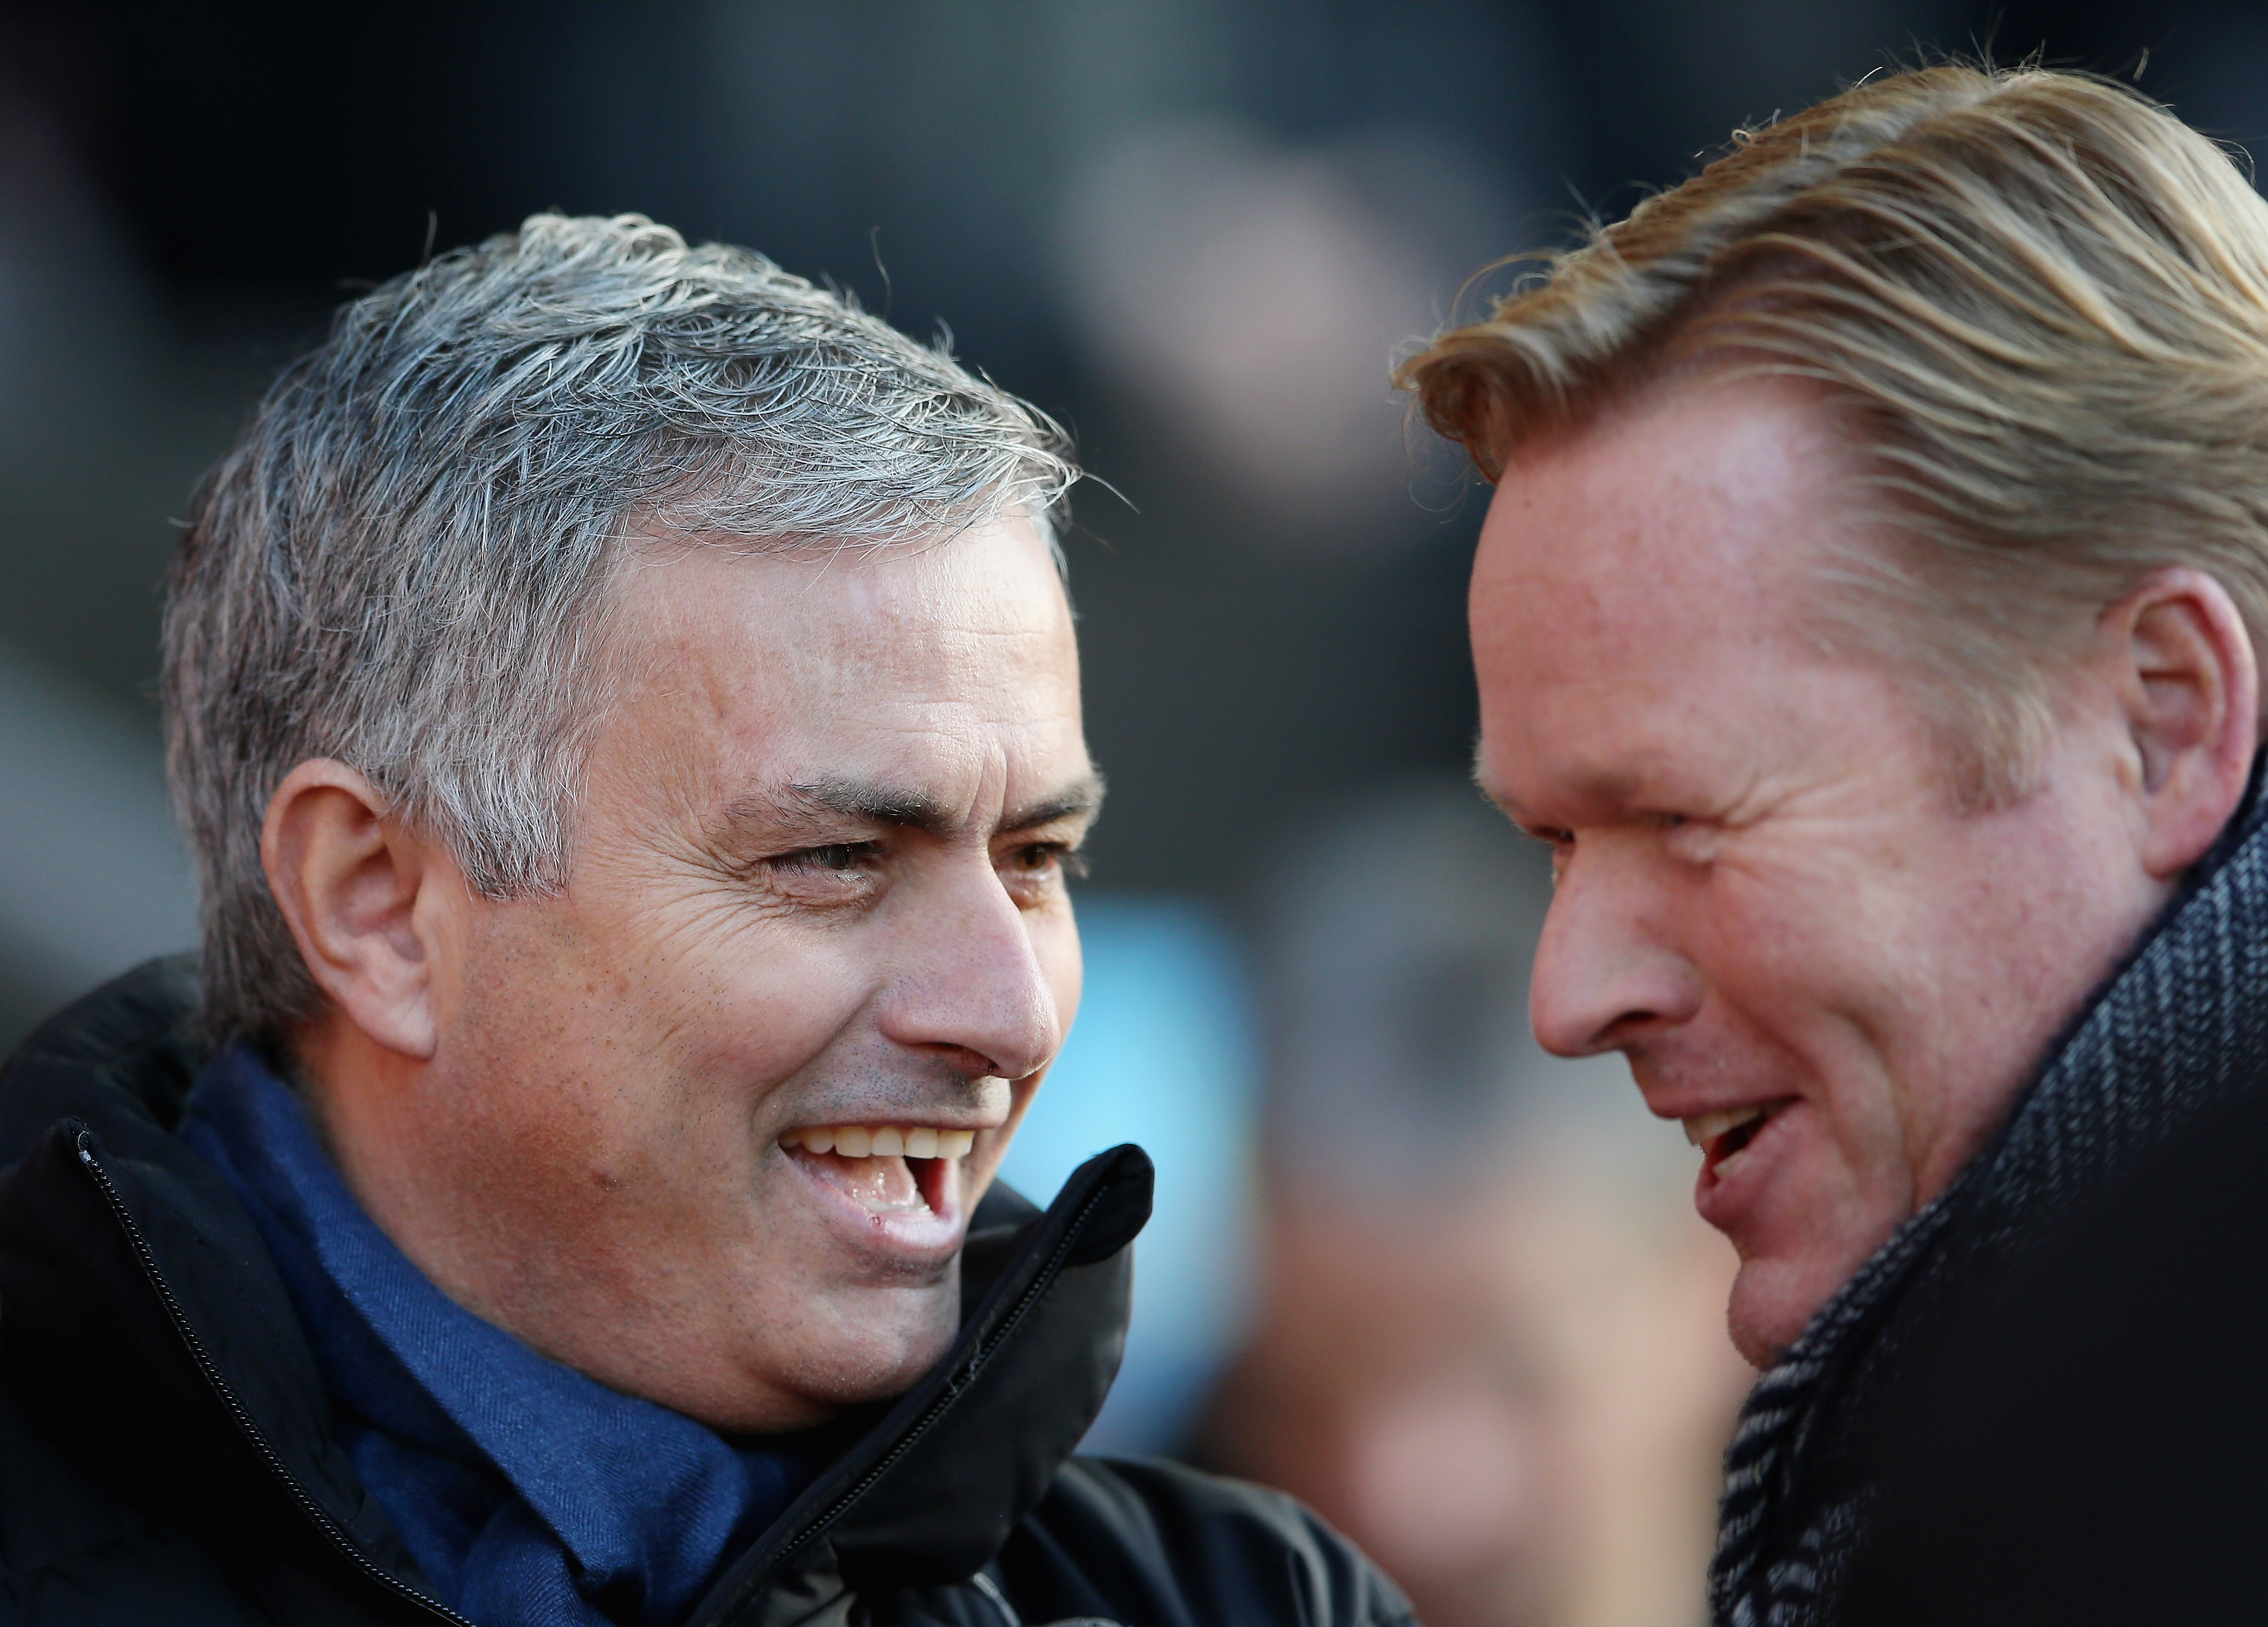 SOUTHAMPTON, ENGLAND - DECEMBER 28:  Chelsea manager Jose Mourinho with Southampton manager Ronald Koeman during the Premier League match between Southampton and Chelsea at St Mary's Stadium on December 28, 2014 in Southampton, England.  (Photo by Scott Heavey/Getty Images)